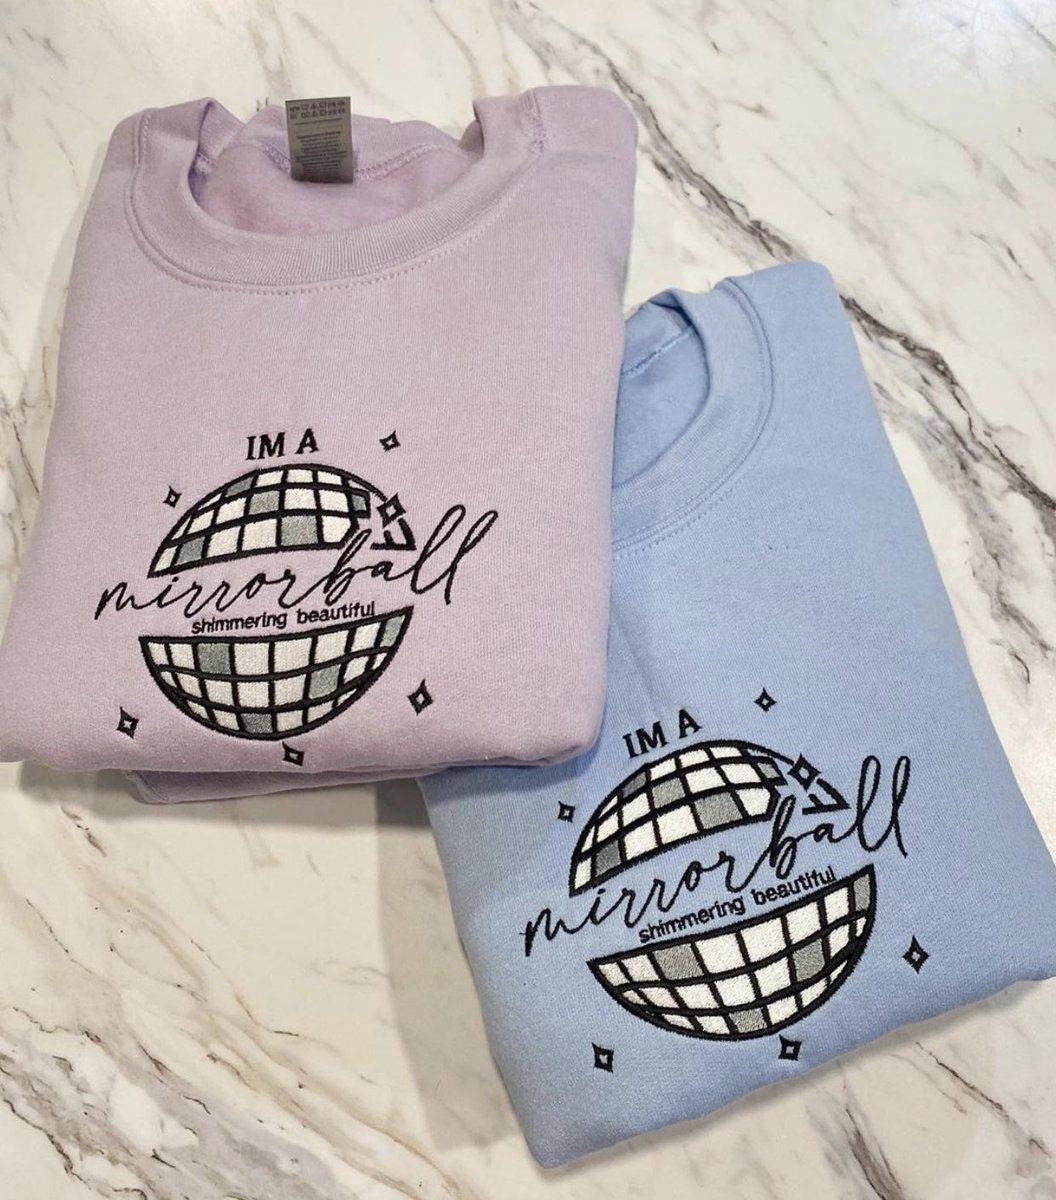 . @DizzyDahlias  http://dizzydahlias.com  makes the freakin cutest Taylor inspired embroidered crewnecks! Look at those mirrorball ones  so in love. They also have adorable stickers, too!